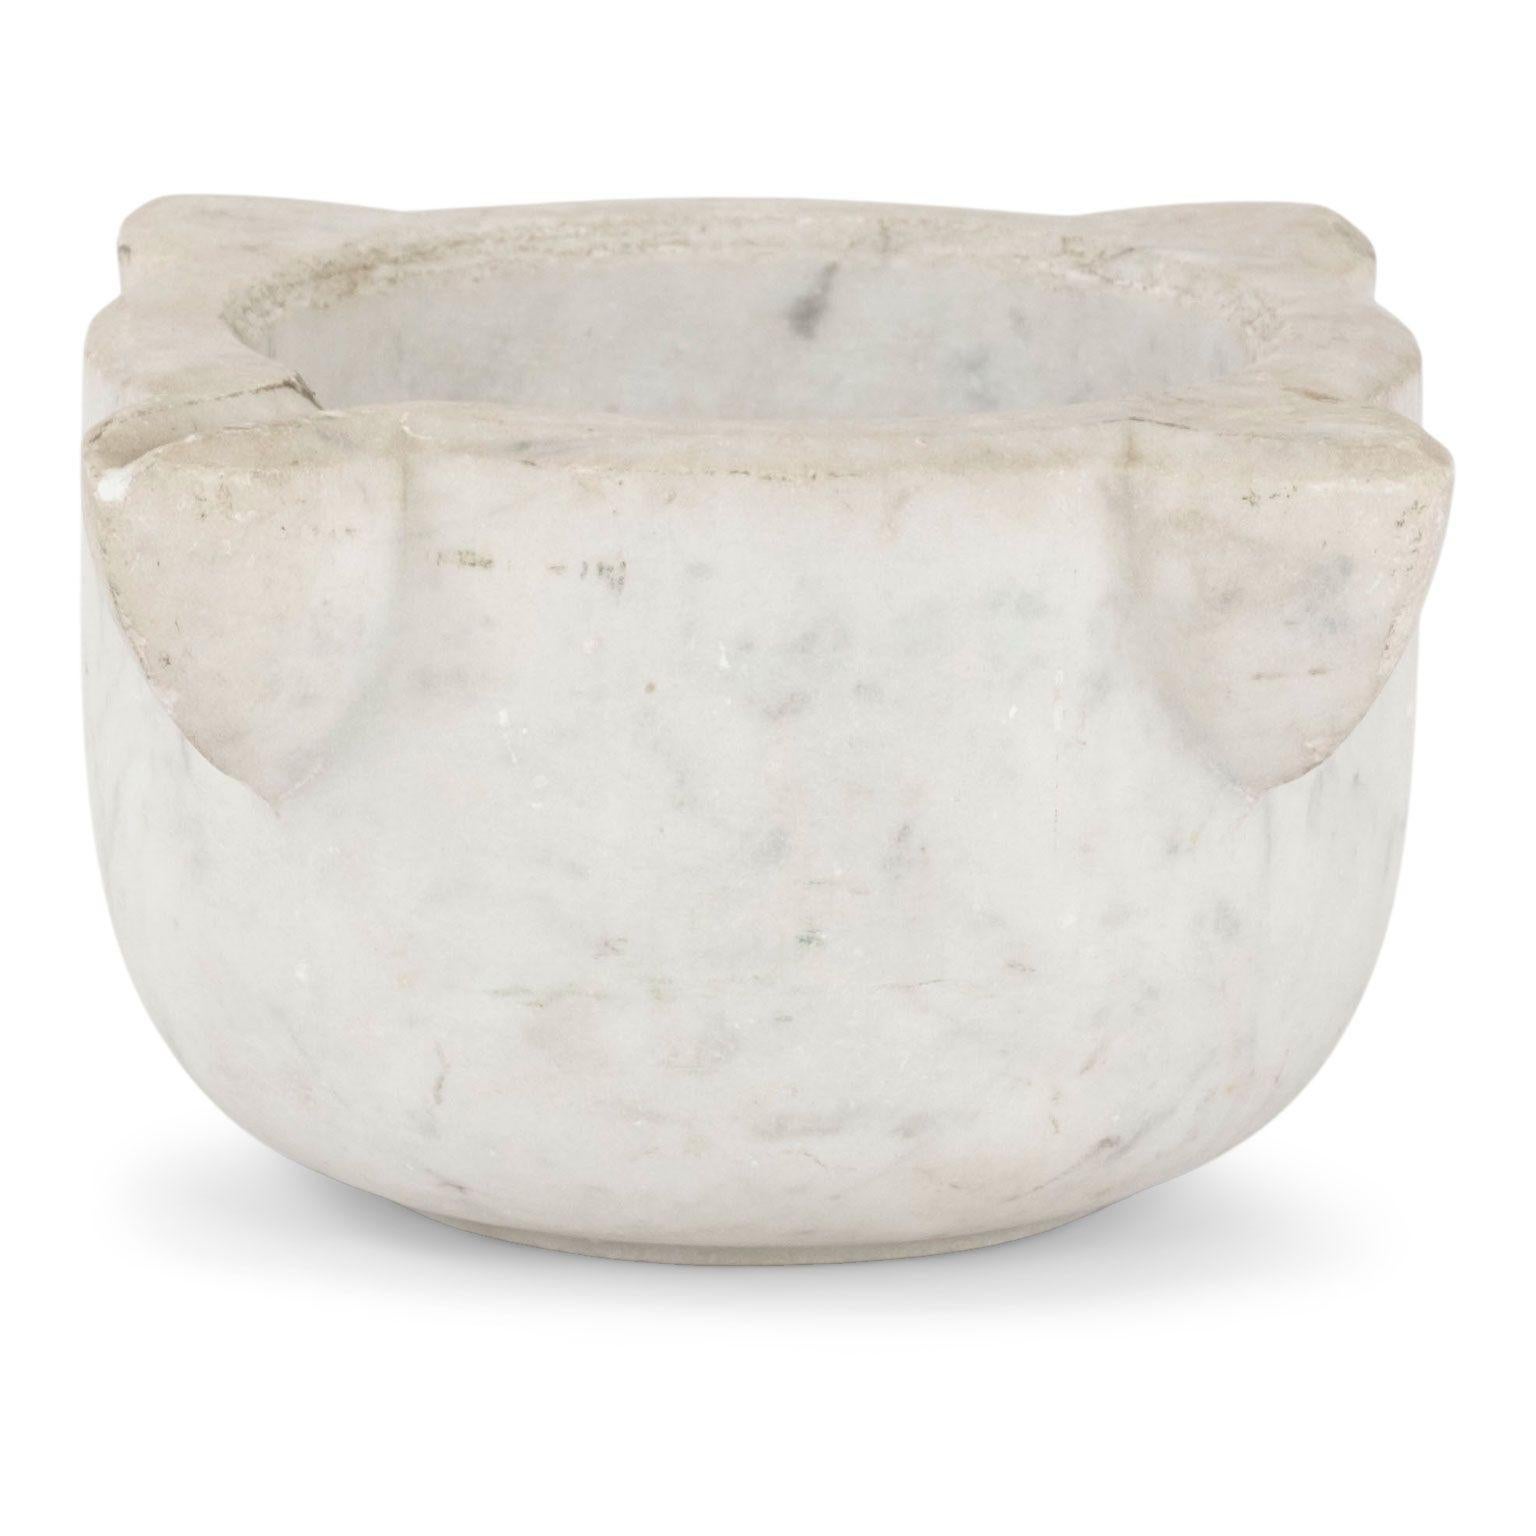 19th century stone mortar from Italy. Hand-carved marble mortar in a conical shape with four handles. One handle notched with a channel for pouring. Beautiful as a sculptural accent piece or decorative bowl. Seven stone mortars of varying shapes and